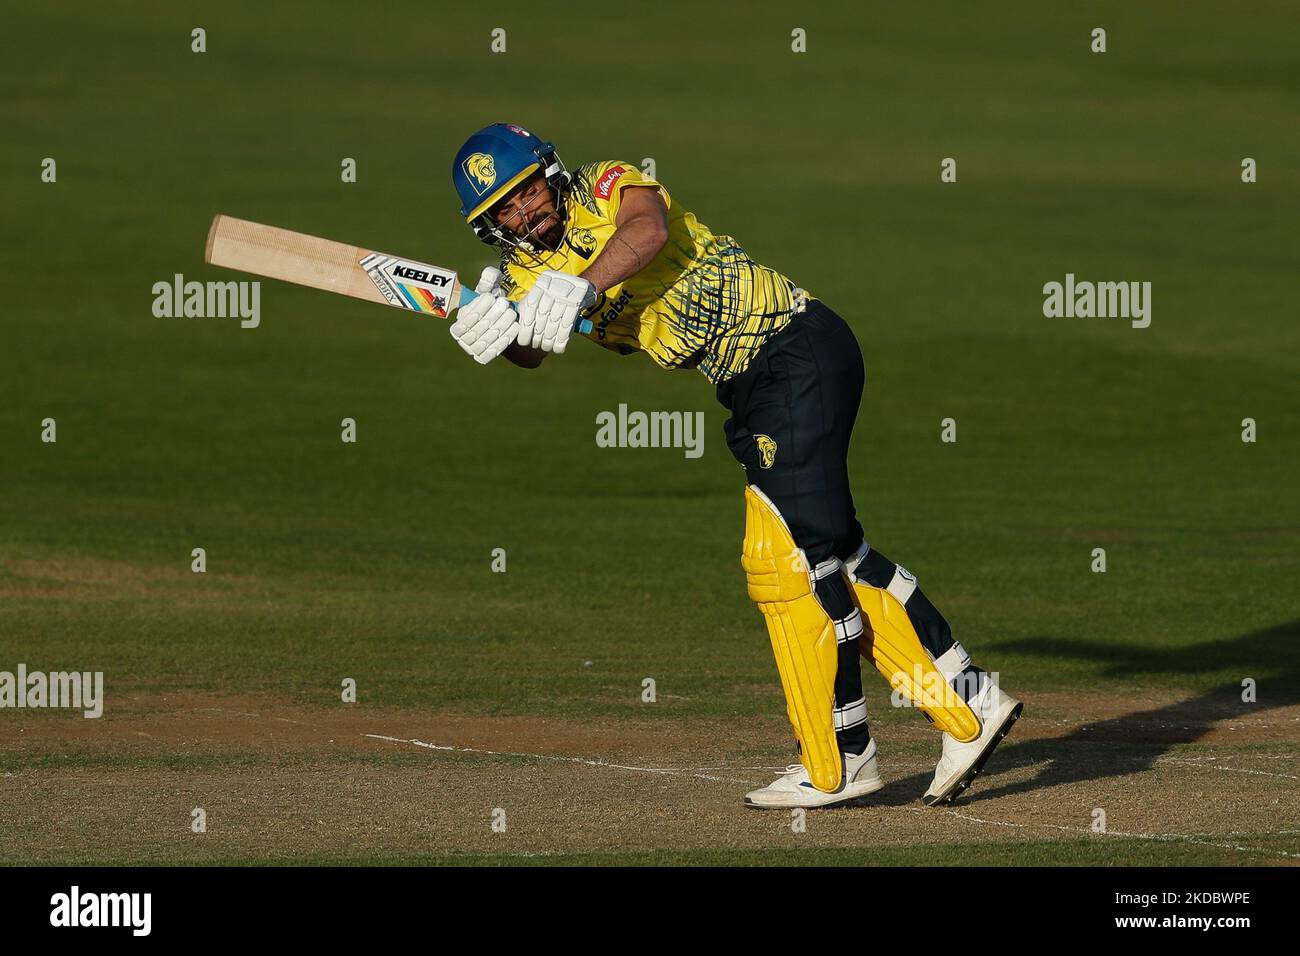 Ned Eckersley of Durham bats during the Vitality Blast T20 match between Durham County Cricket Club and Lancashire at the Seat Unique Riverside, Chester le Street on Friday 10th June 2022. (Photo by Will Matthews/MI News/NurPhoto) Stock Photo